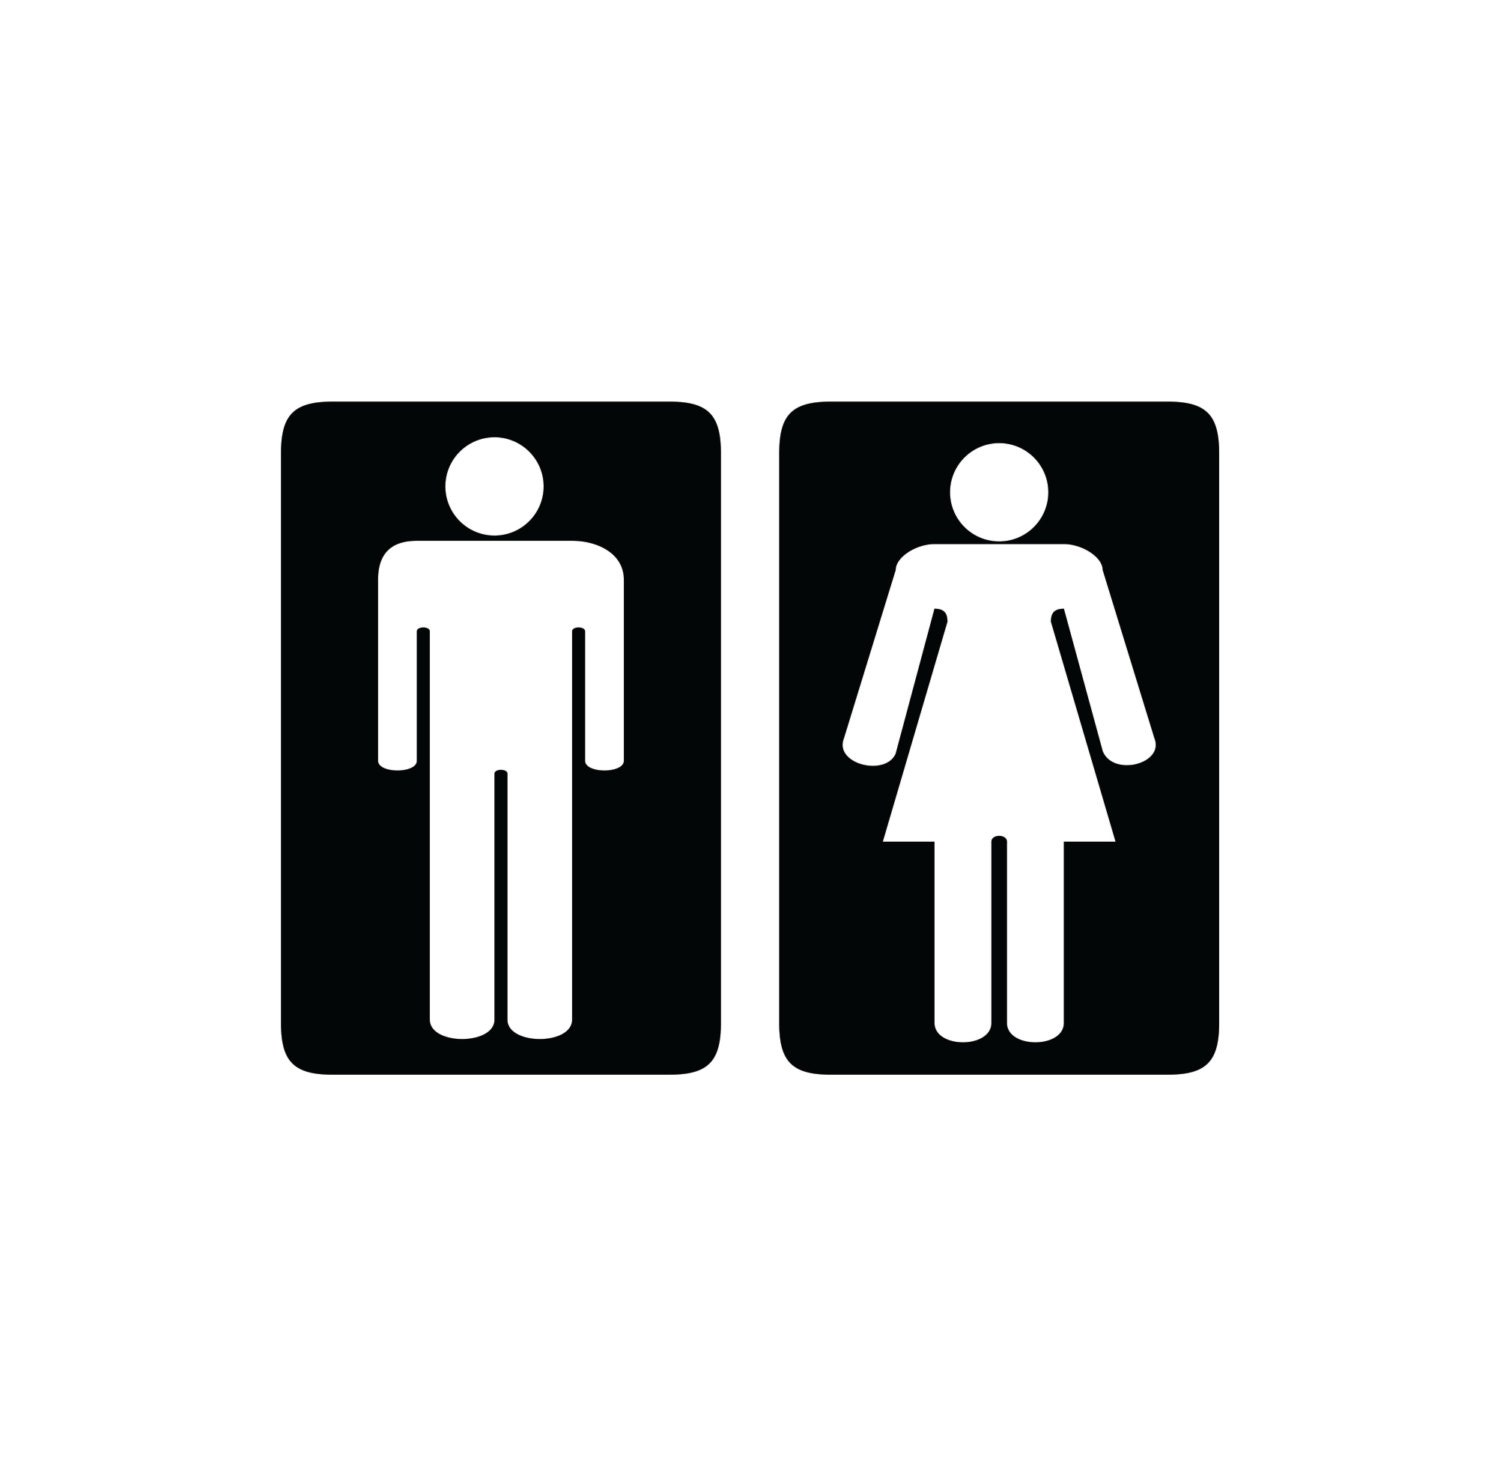 Restroom Signs Set of 2 Business Signs Restaurant by EvyAnnDesigns